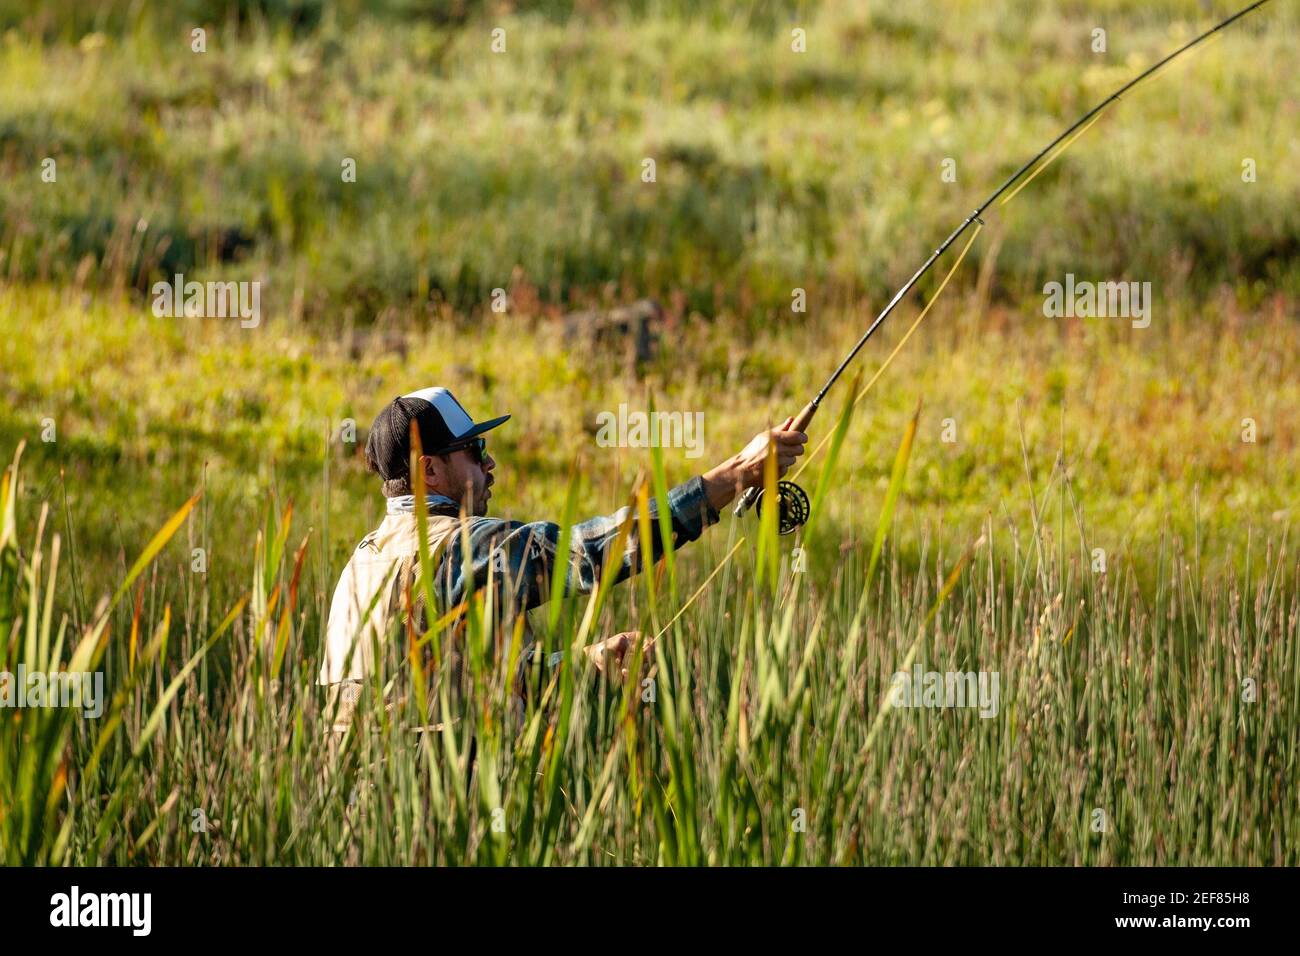 Converging green lines and concentrating fisherman, summer 2018, Yellowstone National Park. Stock Photo